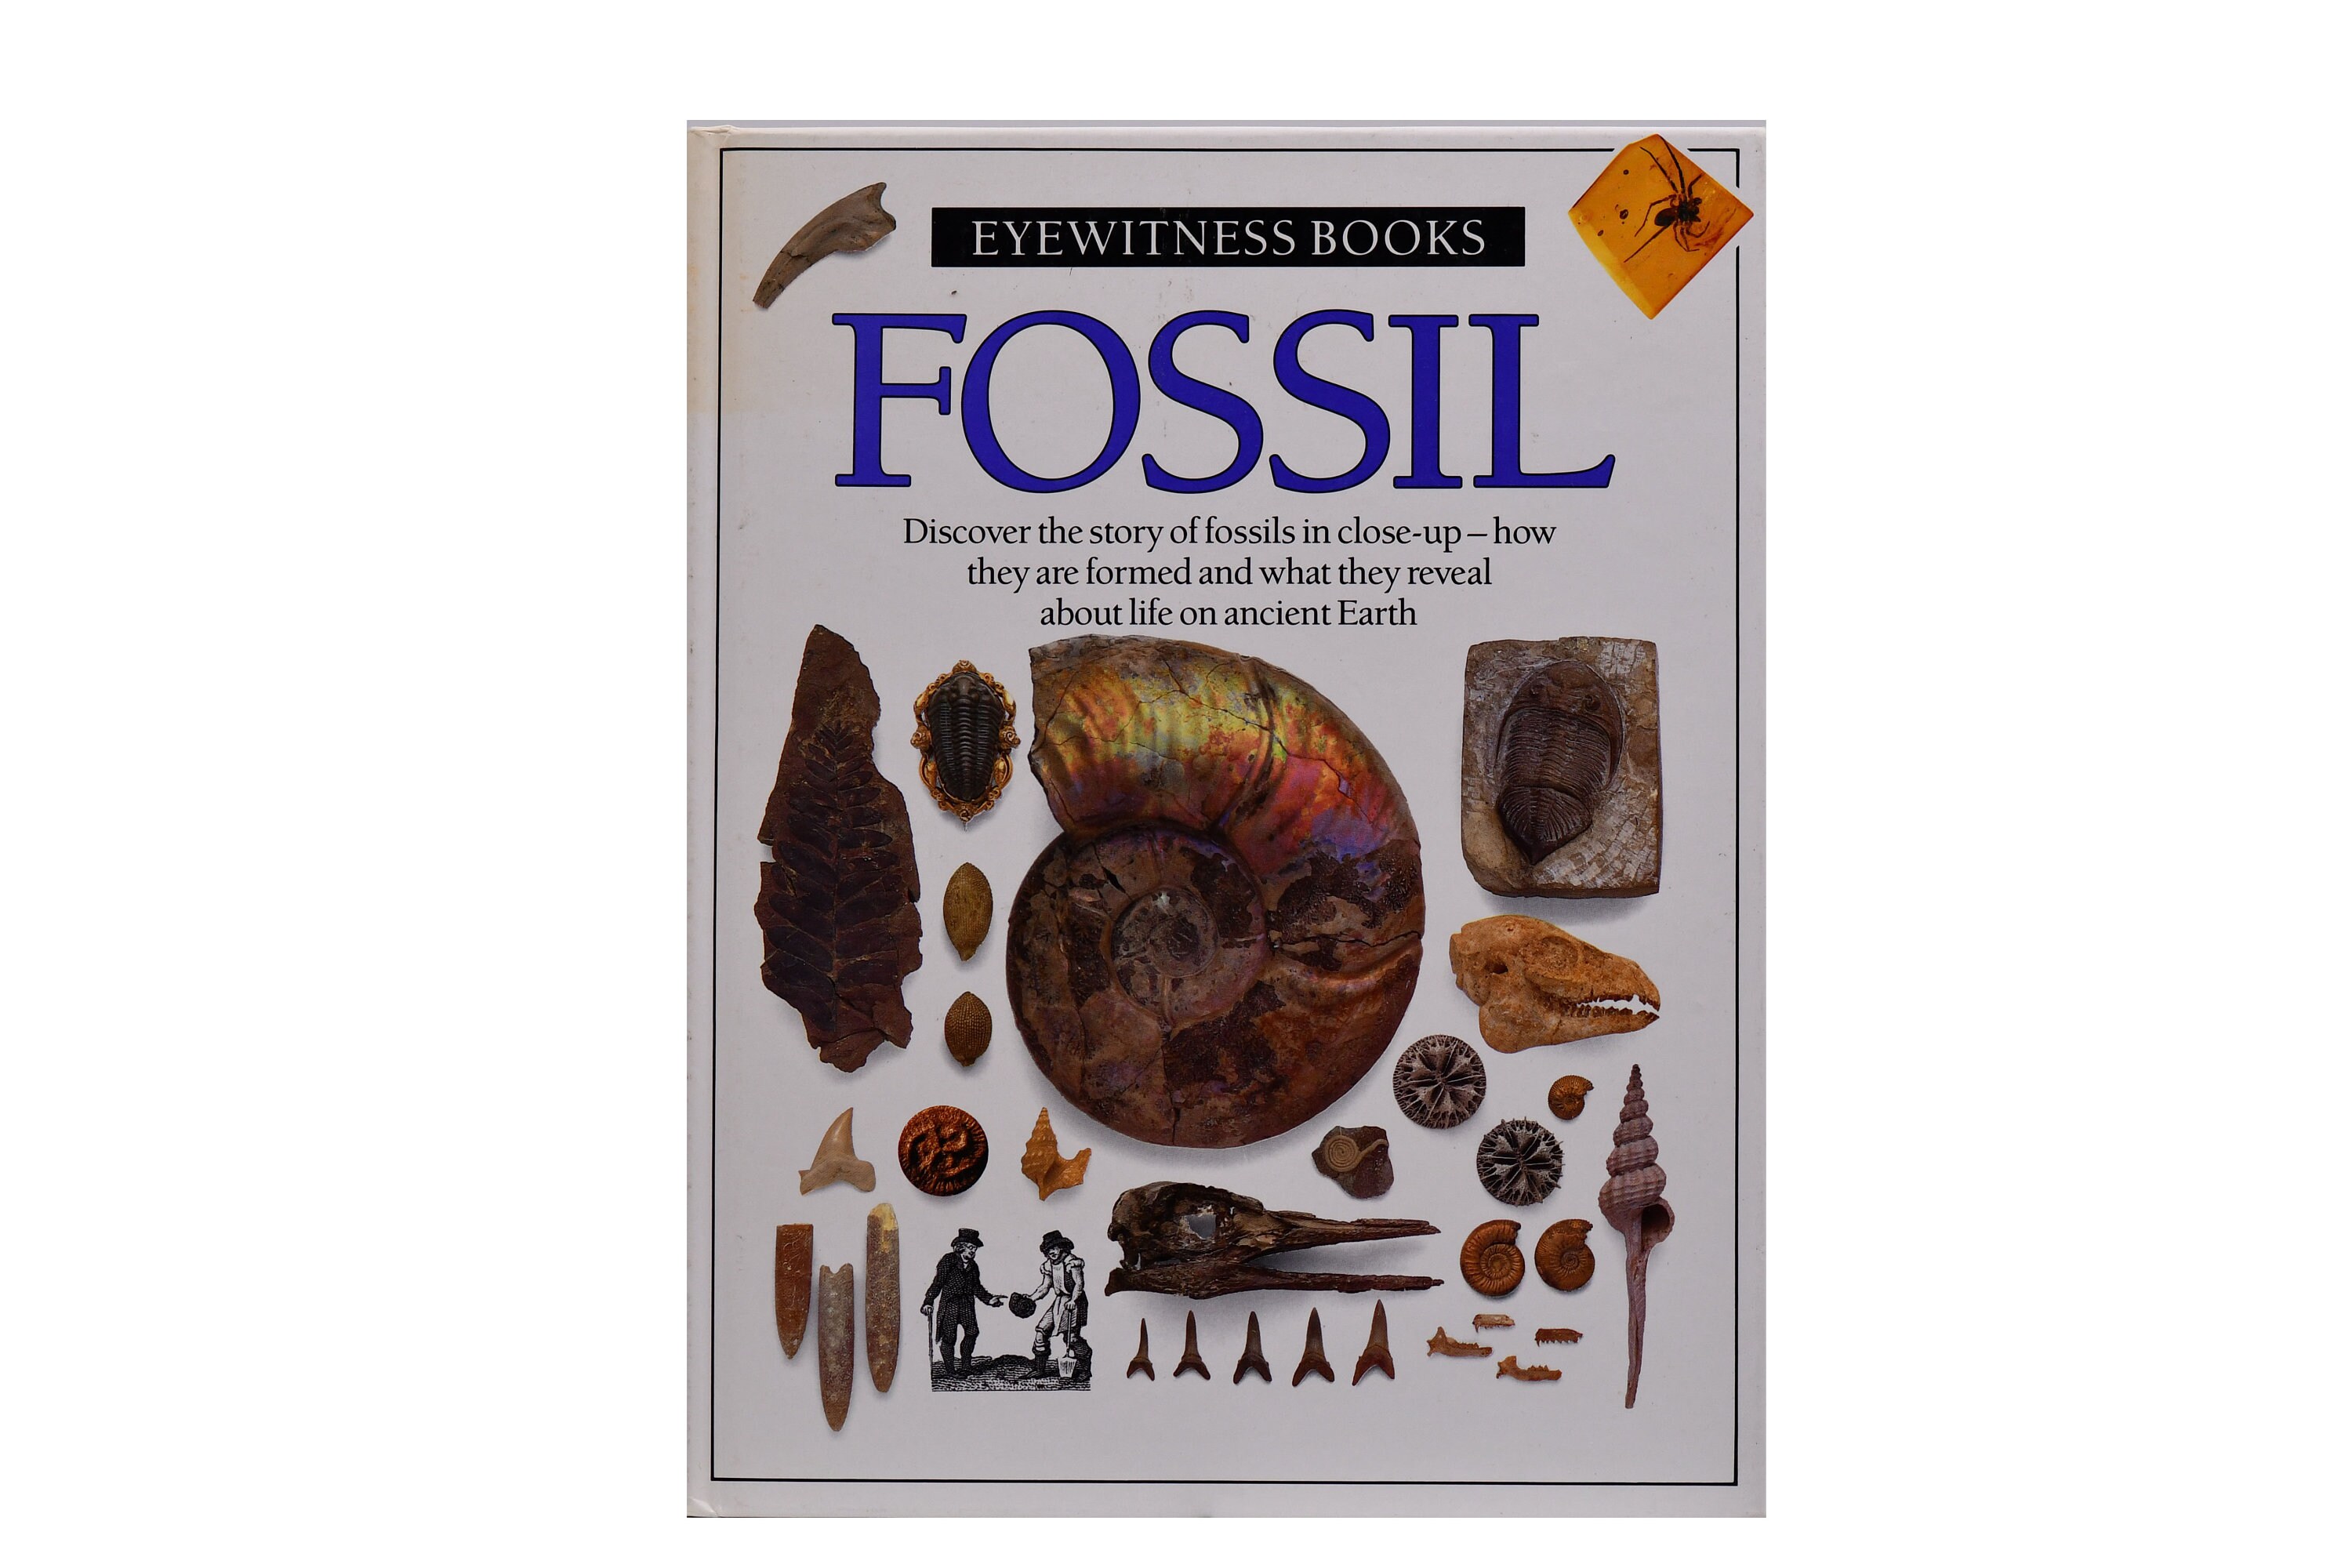 Eyewitness Book fossil by Paul D. Taylor Ph.d - Etsy